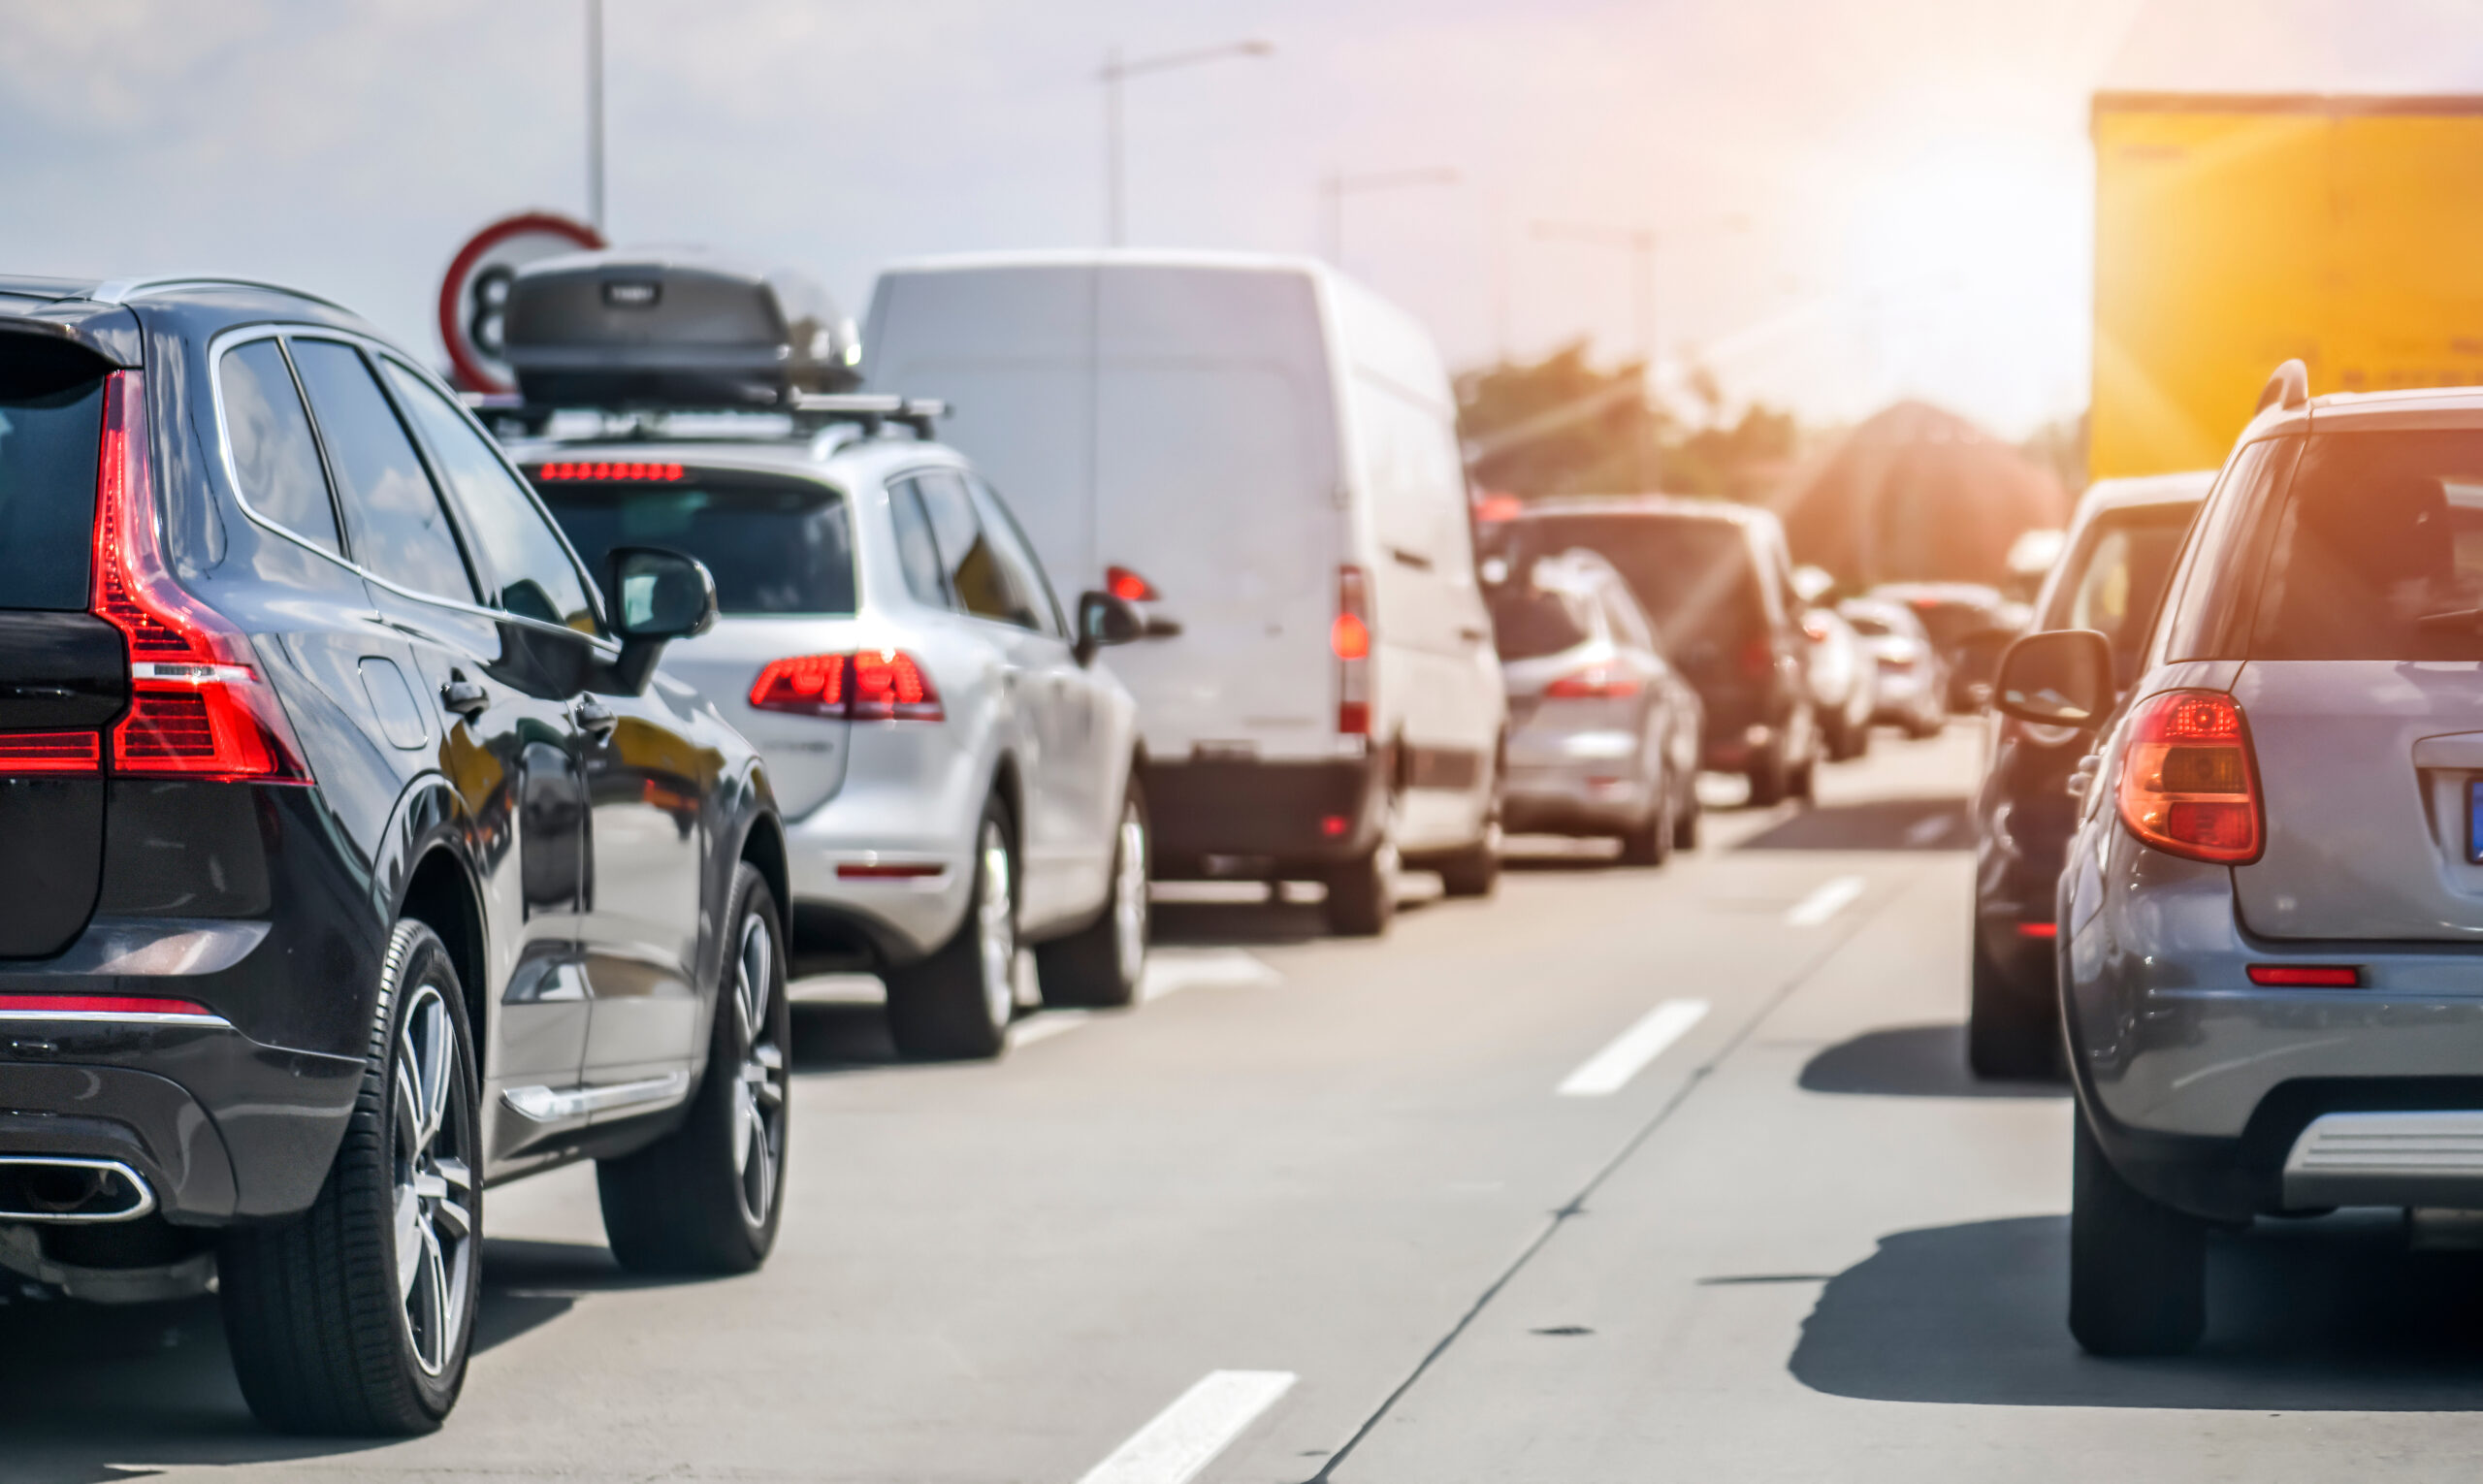 Who Is at Fault in a Lane Change Accident?